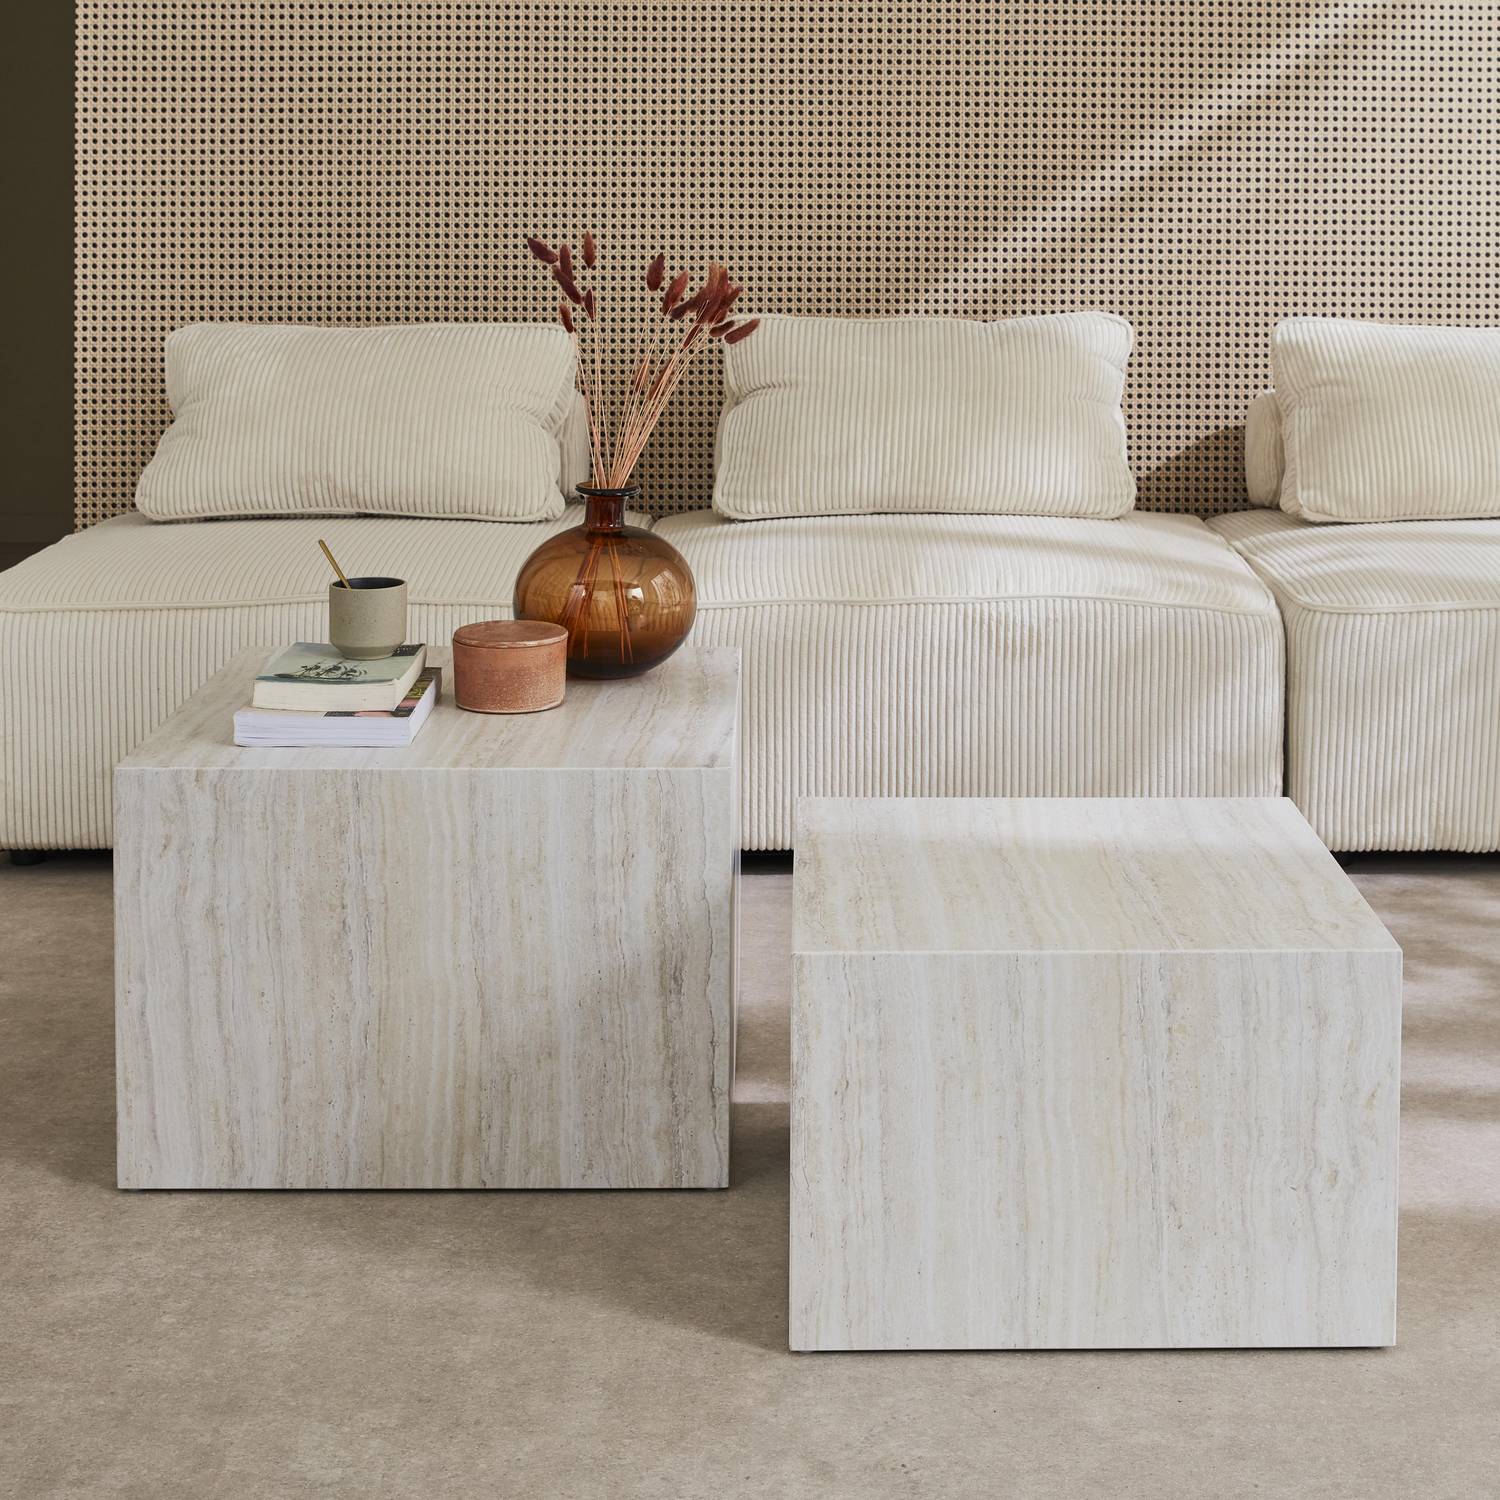 Set of 2 square coffee tables with marble effect, white, L50xW50xH33cm &  L58xW58xH40cm, Paros Photo1